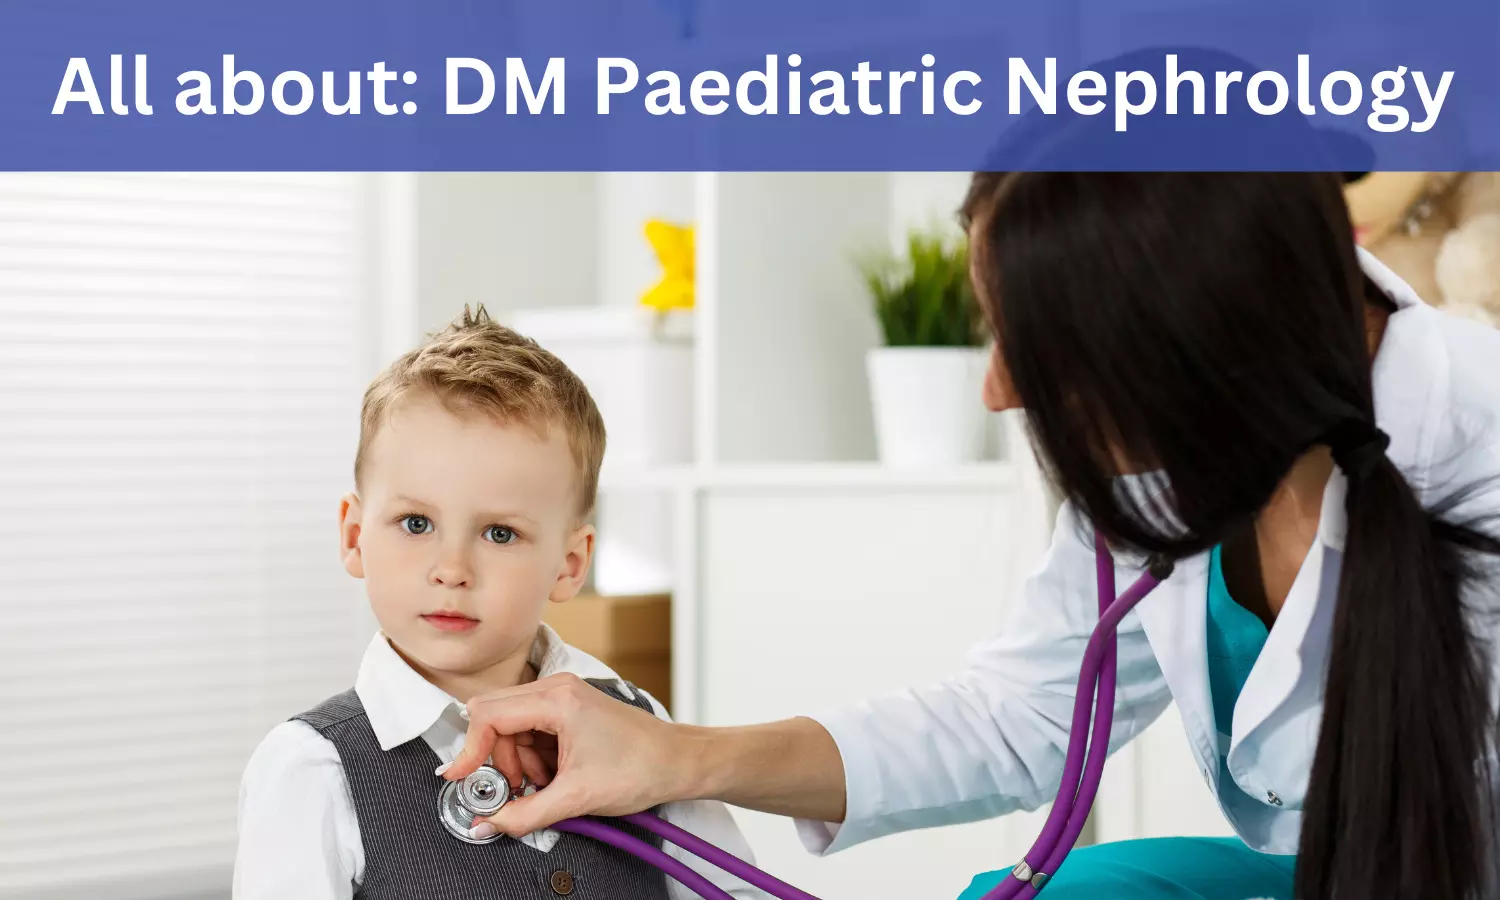 DM Paediatric Nephrology: Admissions, Medical Colleges, Fees, Eligibility Criteria details